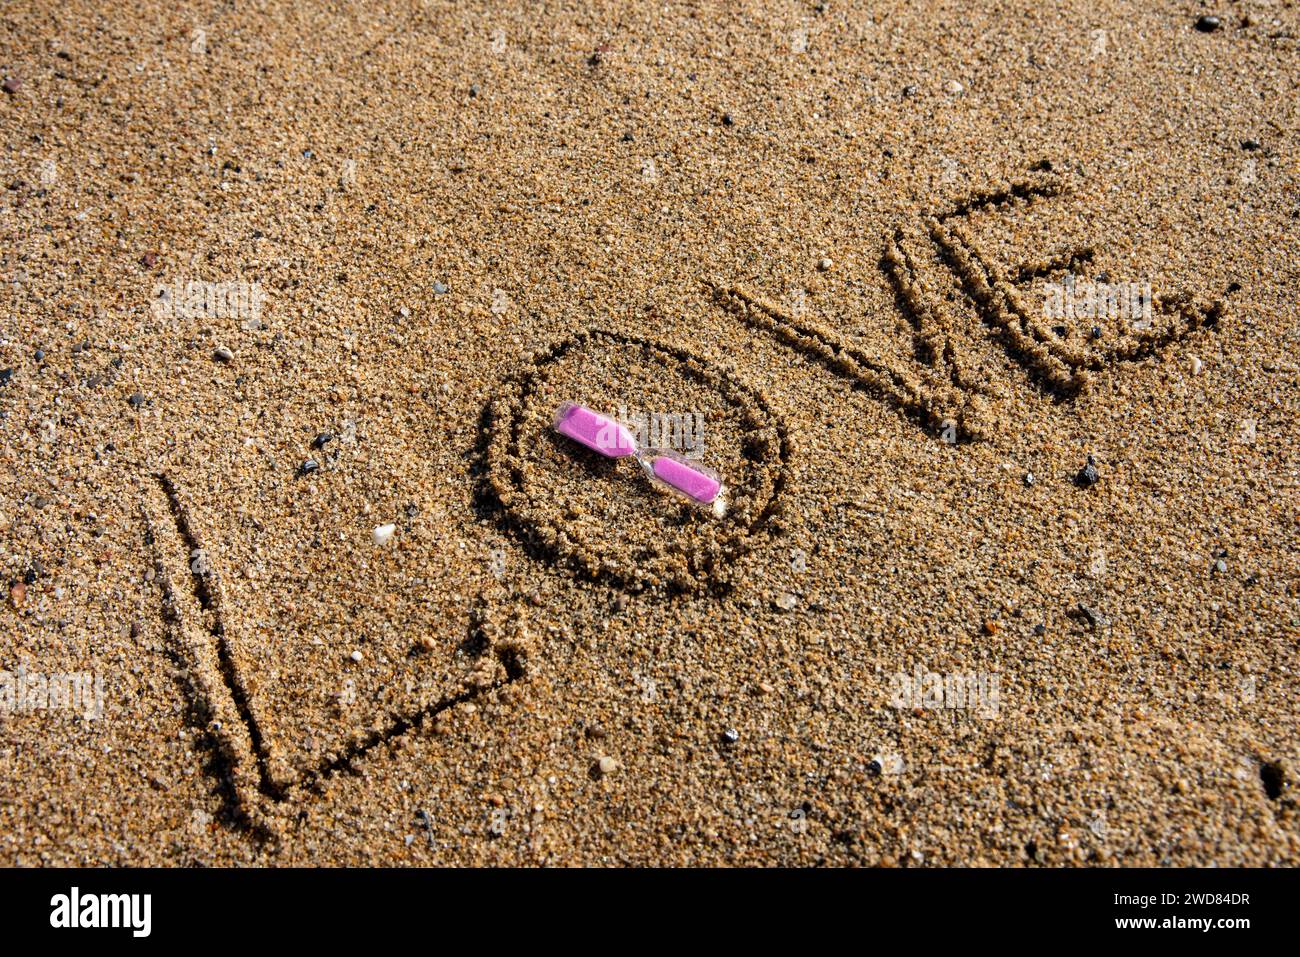 Timeless love: 'Love' inscribed on the beach, cradling a pink-hued hourglass, where romance meets the sands of eternal moments. Stock Photo